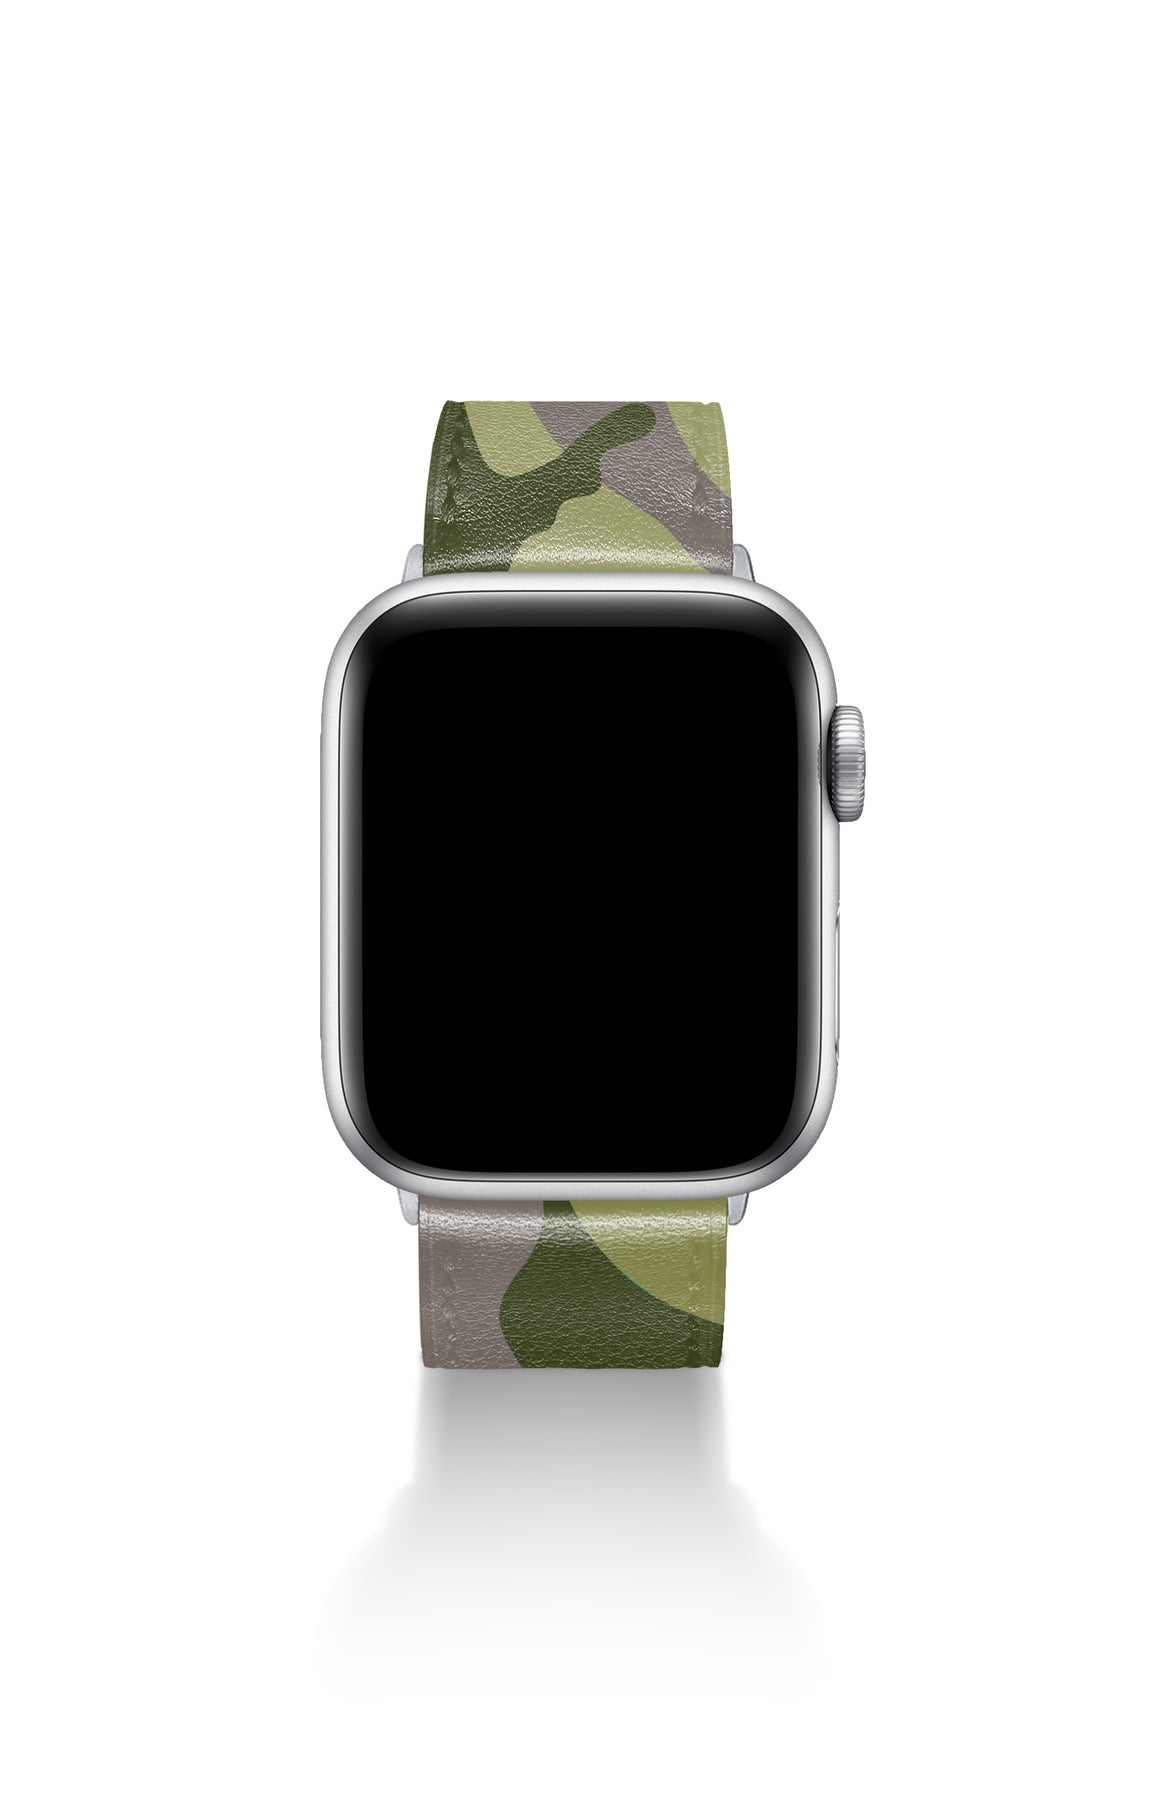 Strap for Apple Watch - Undercover